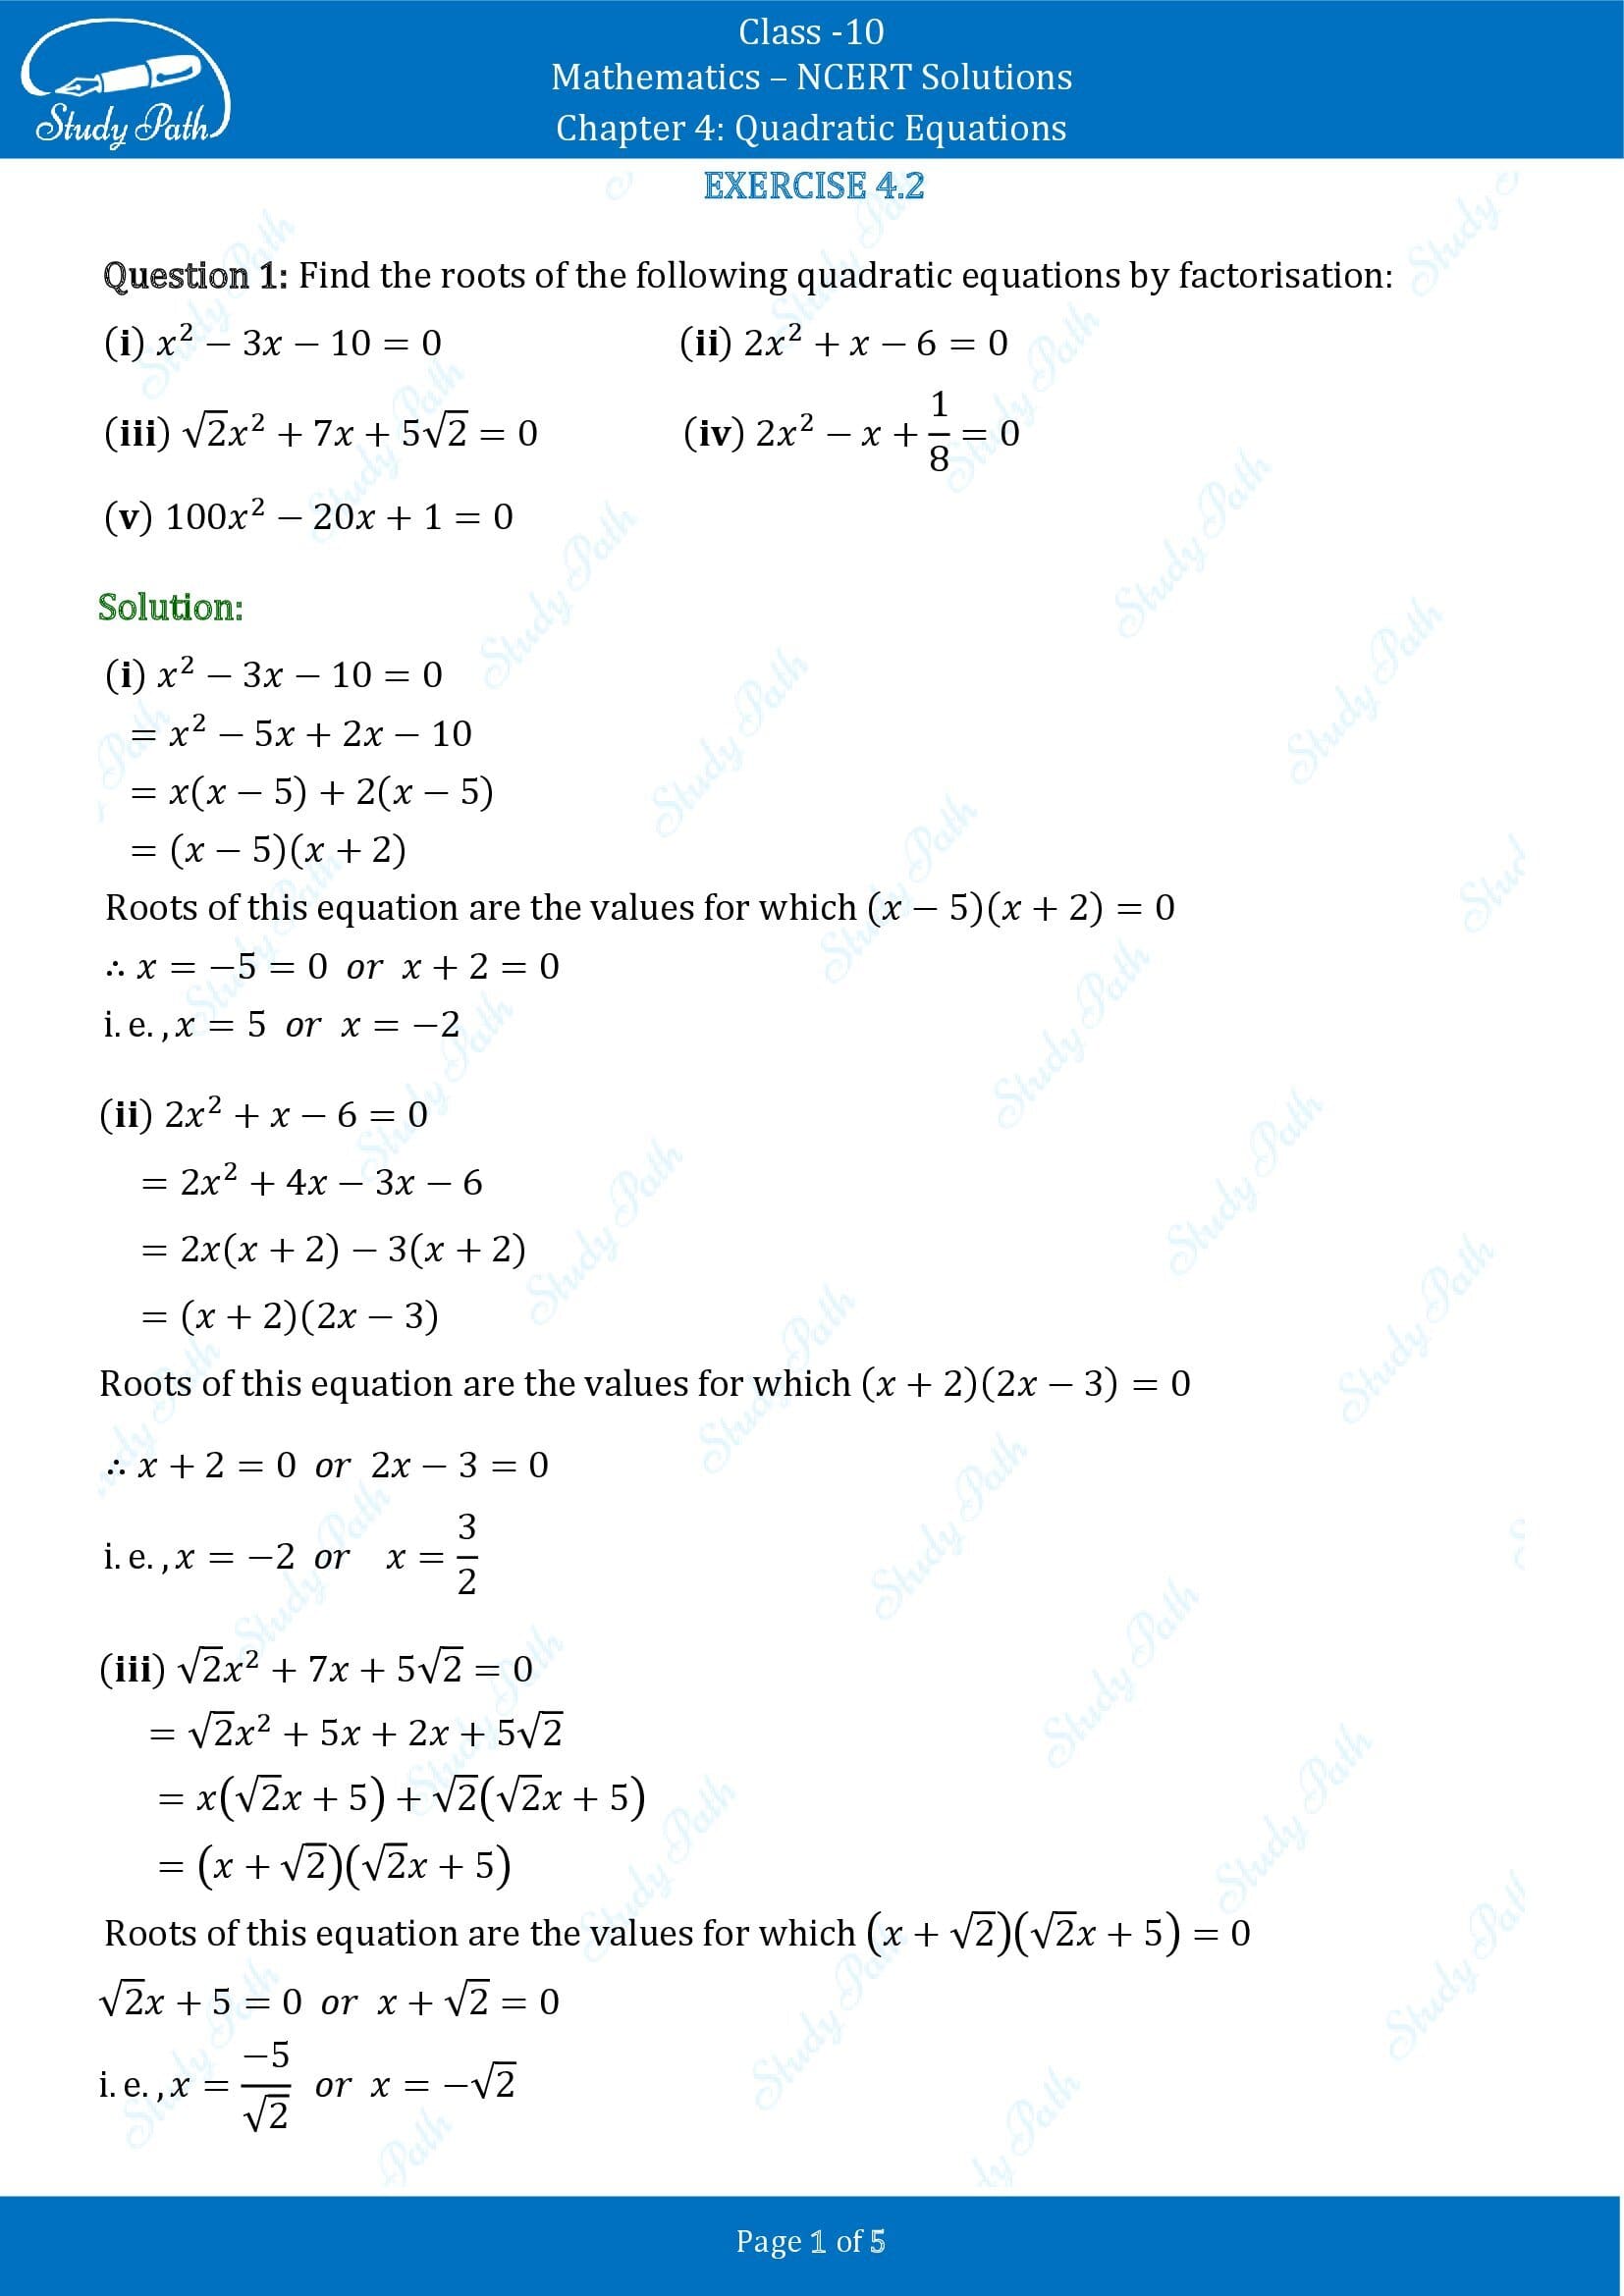 NCERT Solutions for Class 10 Maths Chapter 4 Quadratic Equations Exercise 4.2 00001